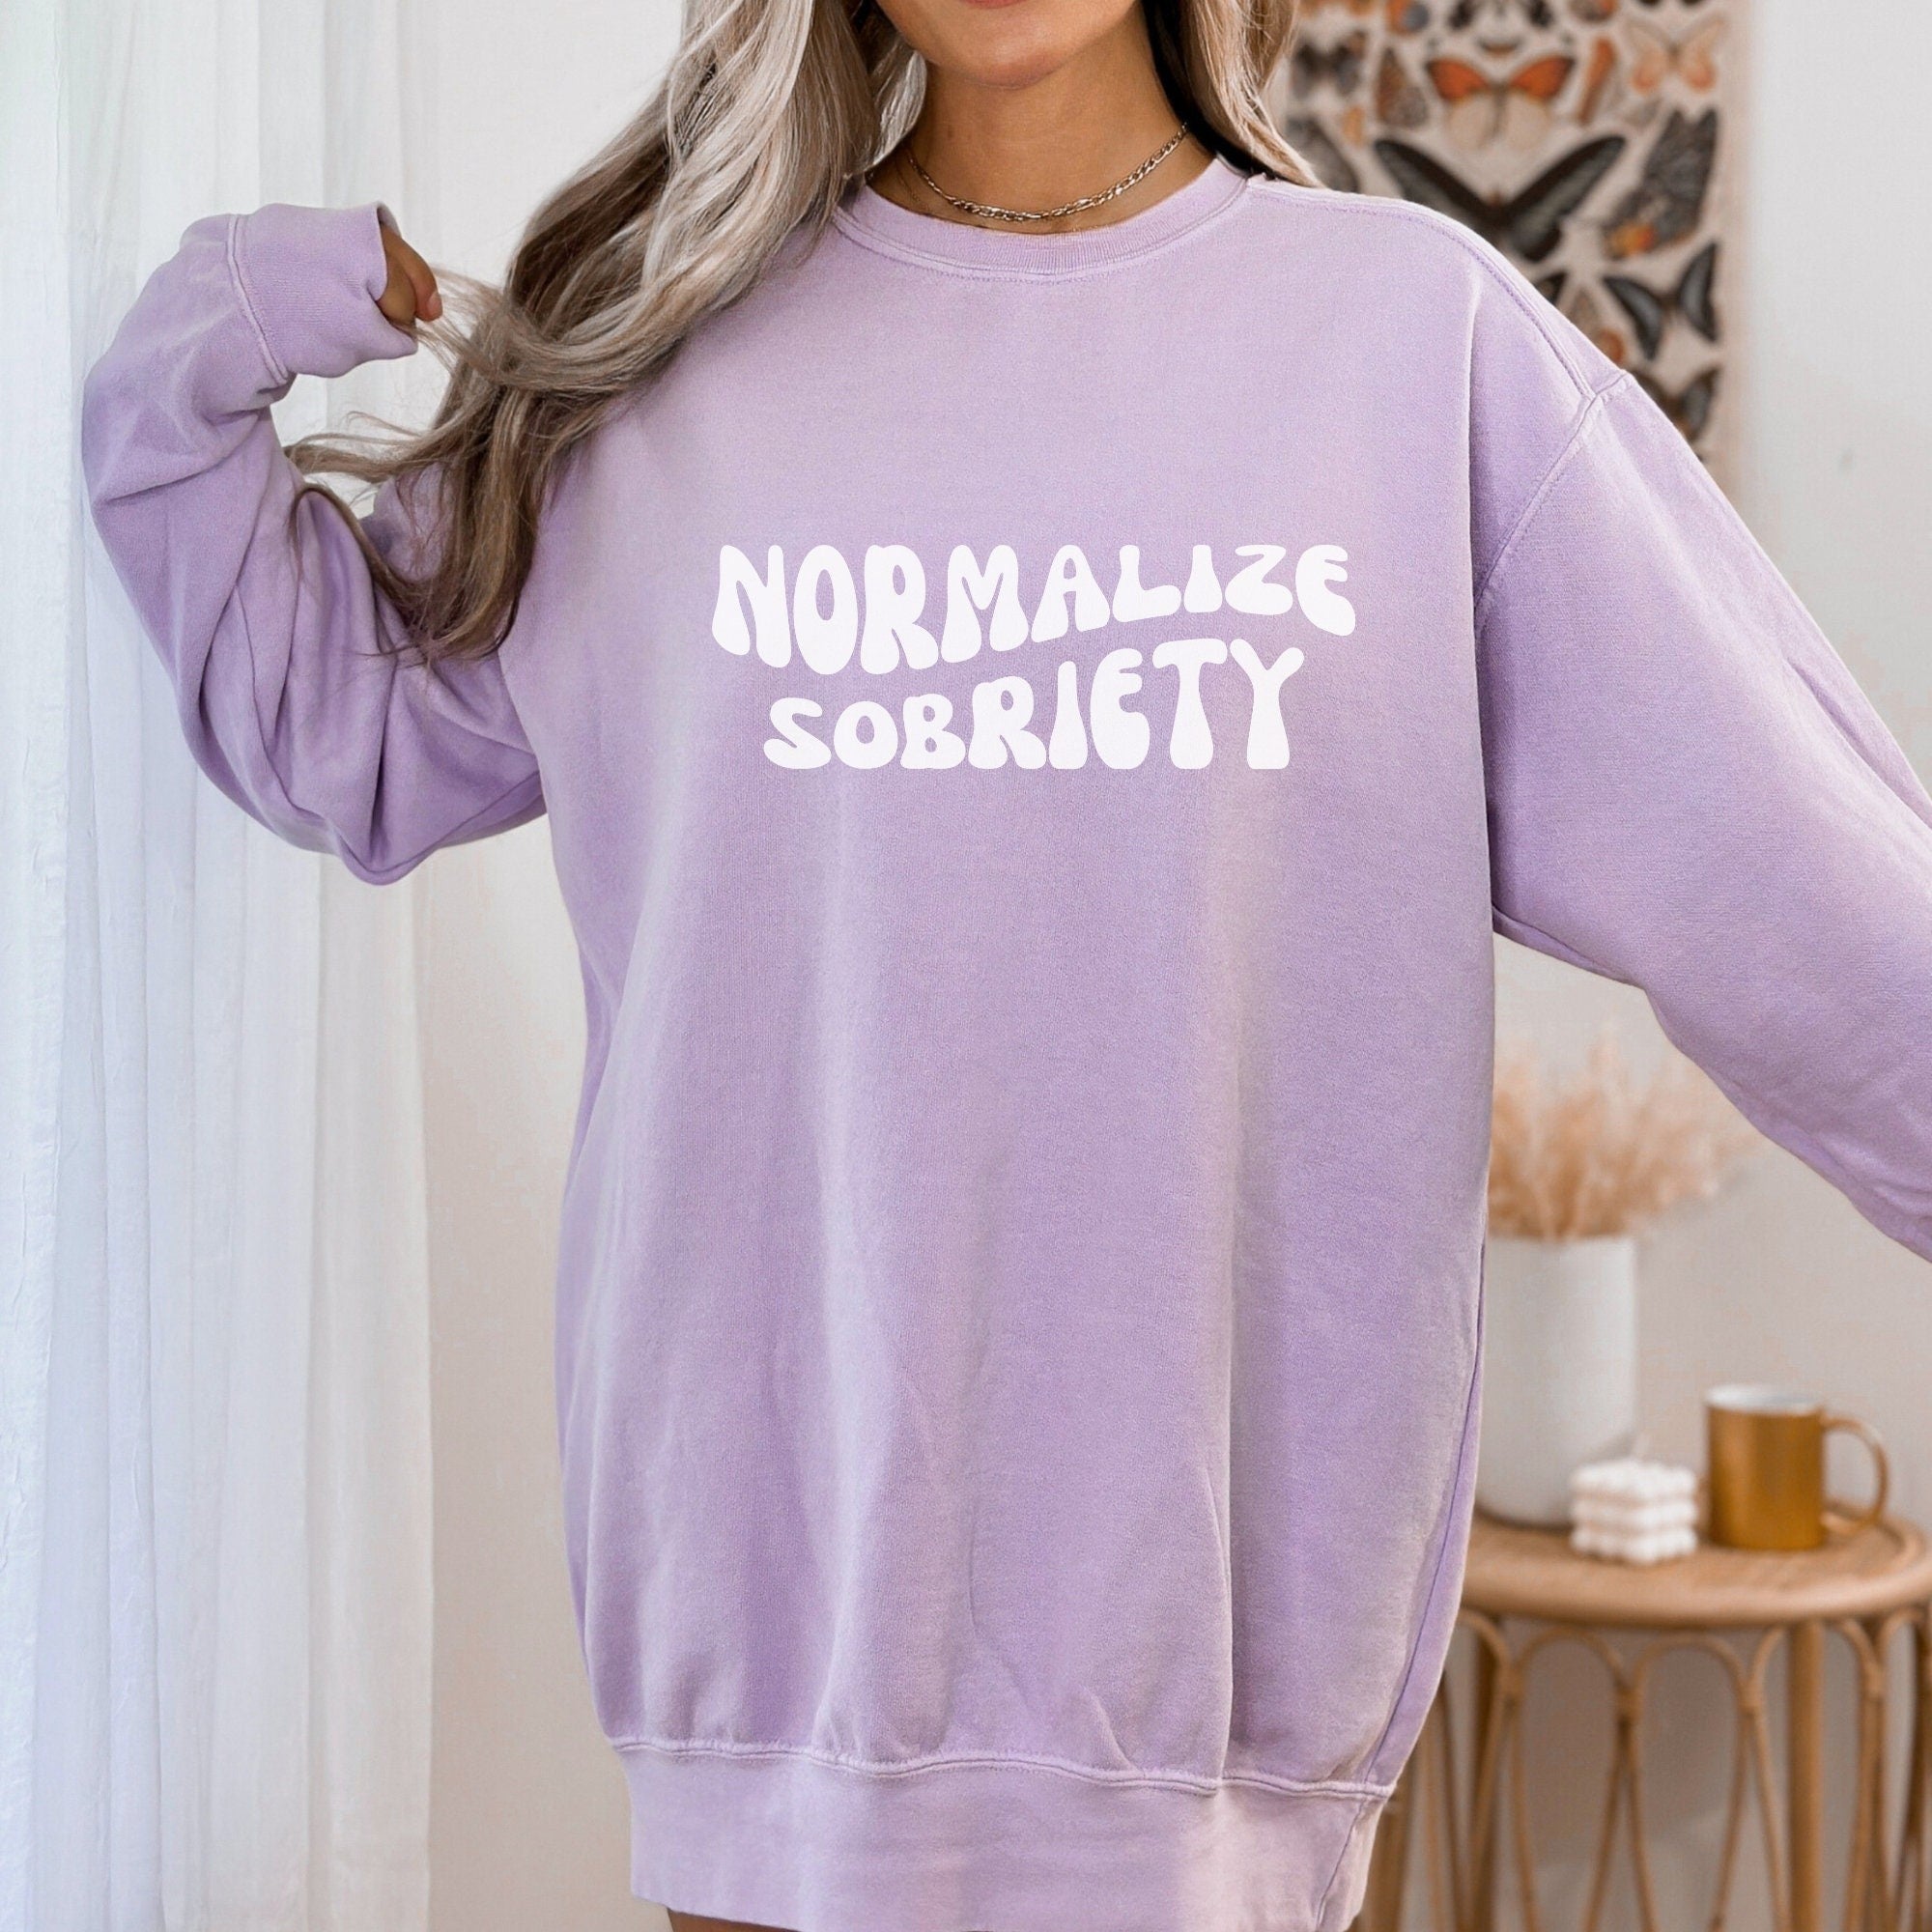 Normalize Sobriety Sweater